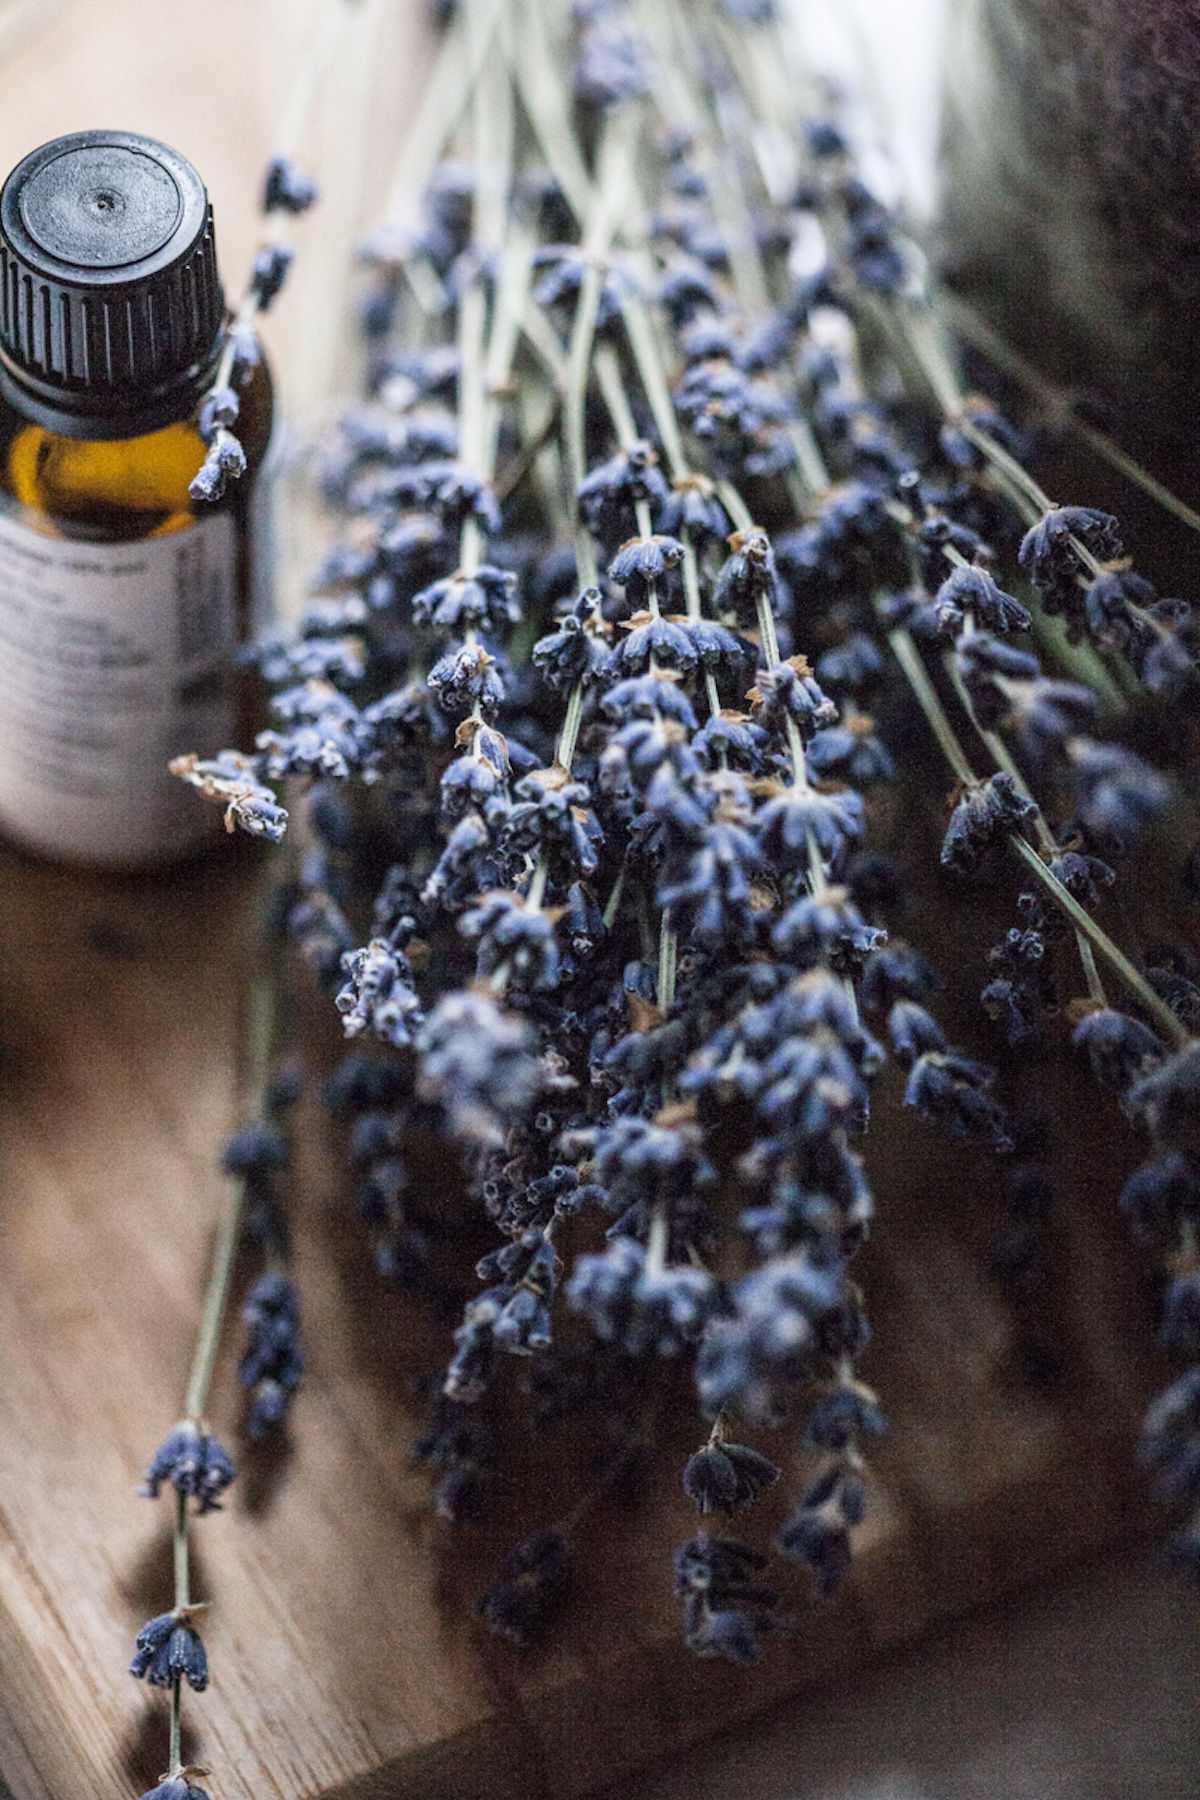 Lavender Essential Oil: A Must-Have For Every Natural Medicine Chest | Herbal Academy | Learn all about lavender essential oil and how to use it safely in your home and for your family's health.